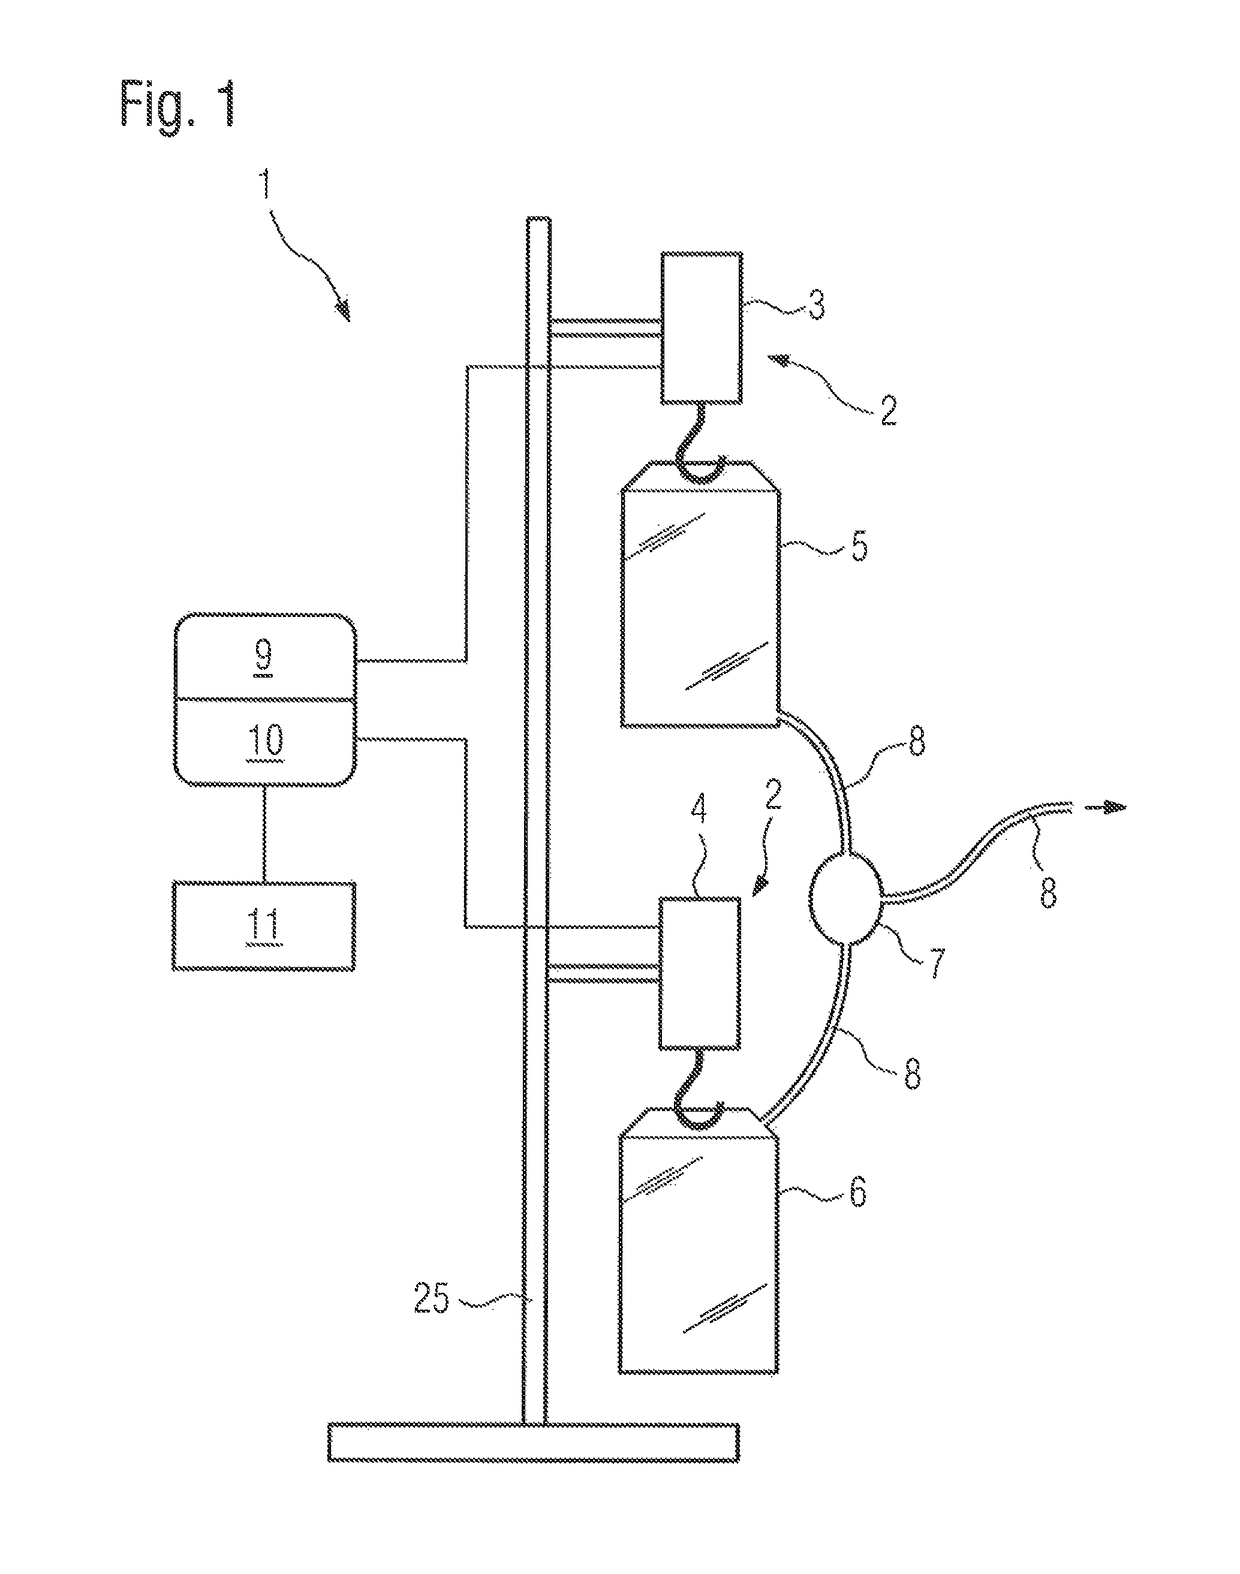 Sensor system for detection of phases and/or phase transitions in peritoneal dialysis treatments